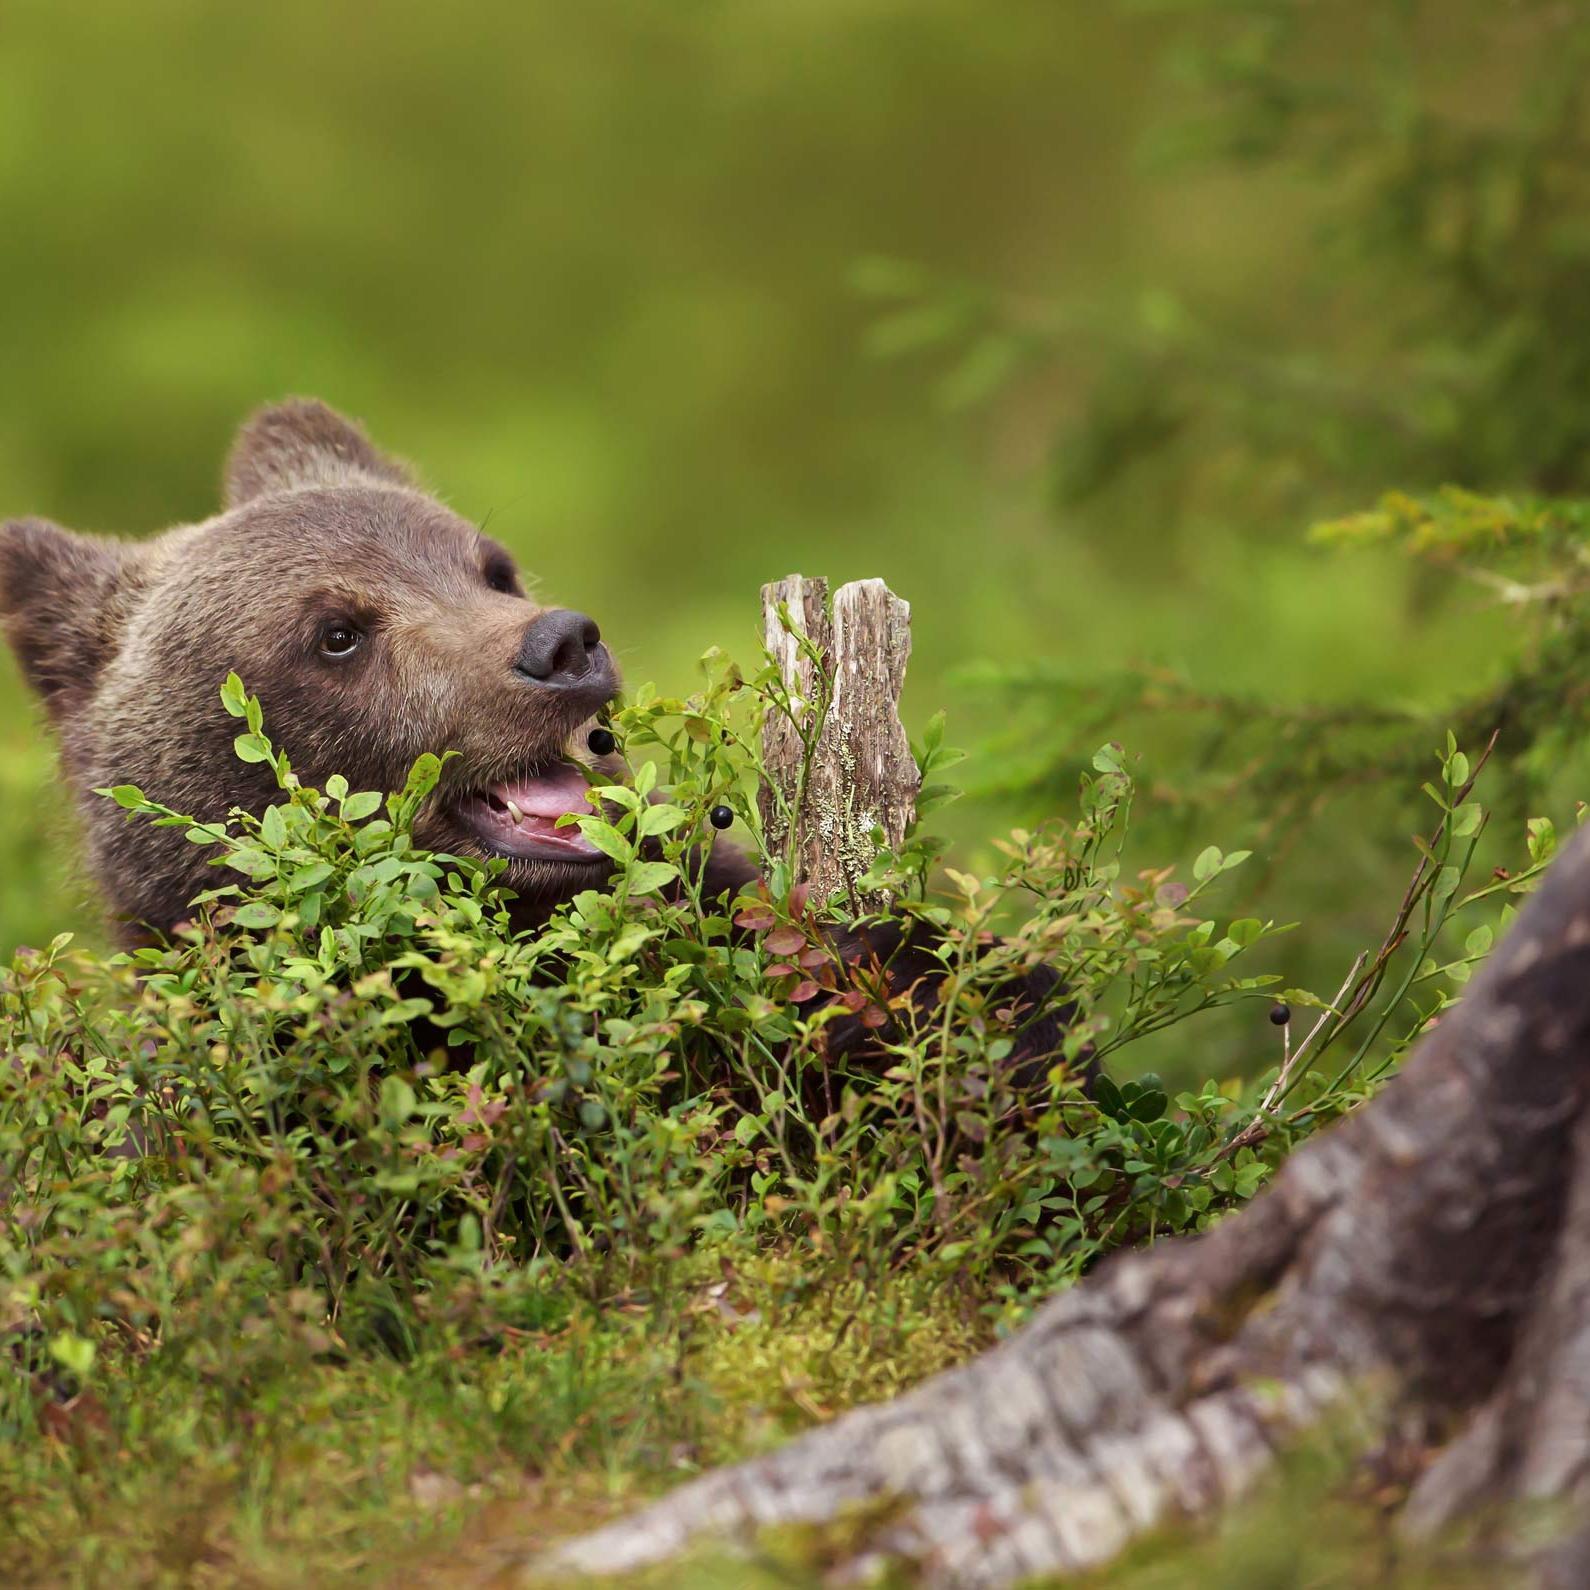 A young brown bear eats blueberries in the forest.